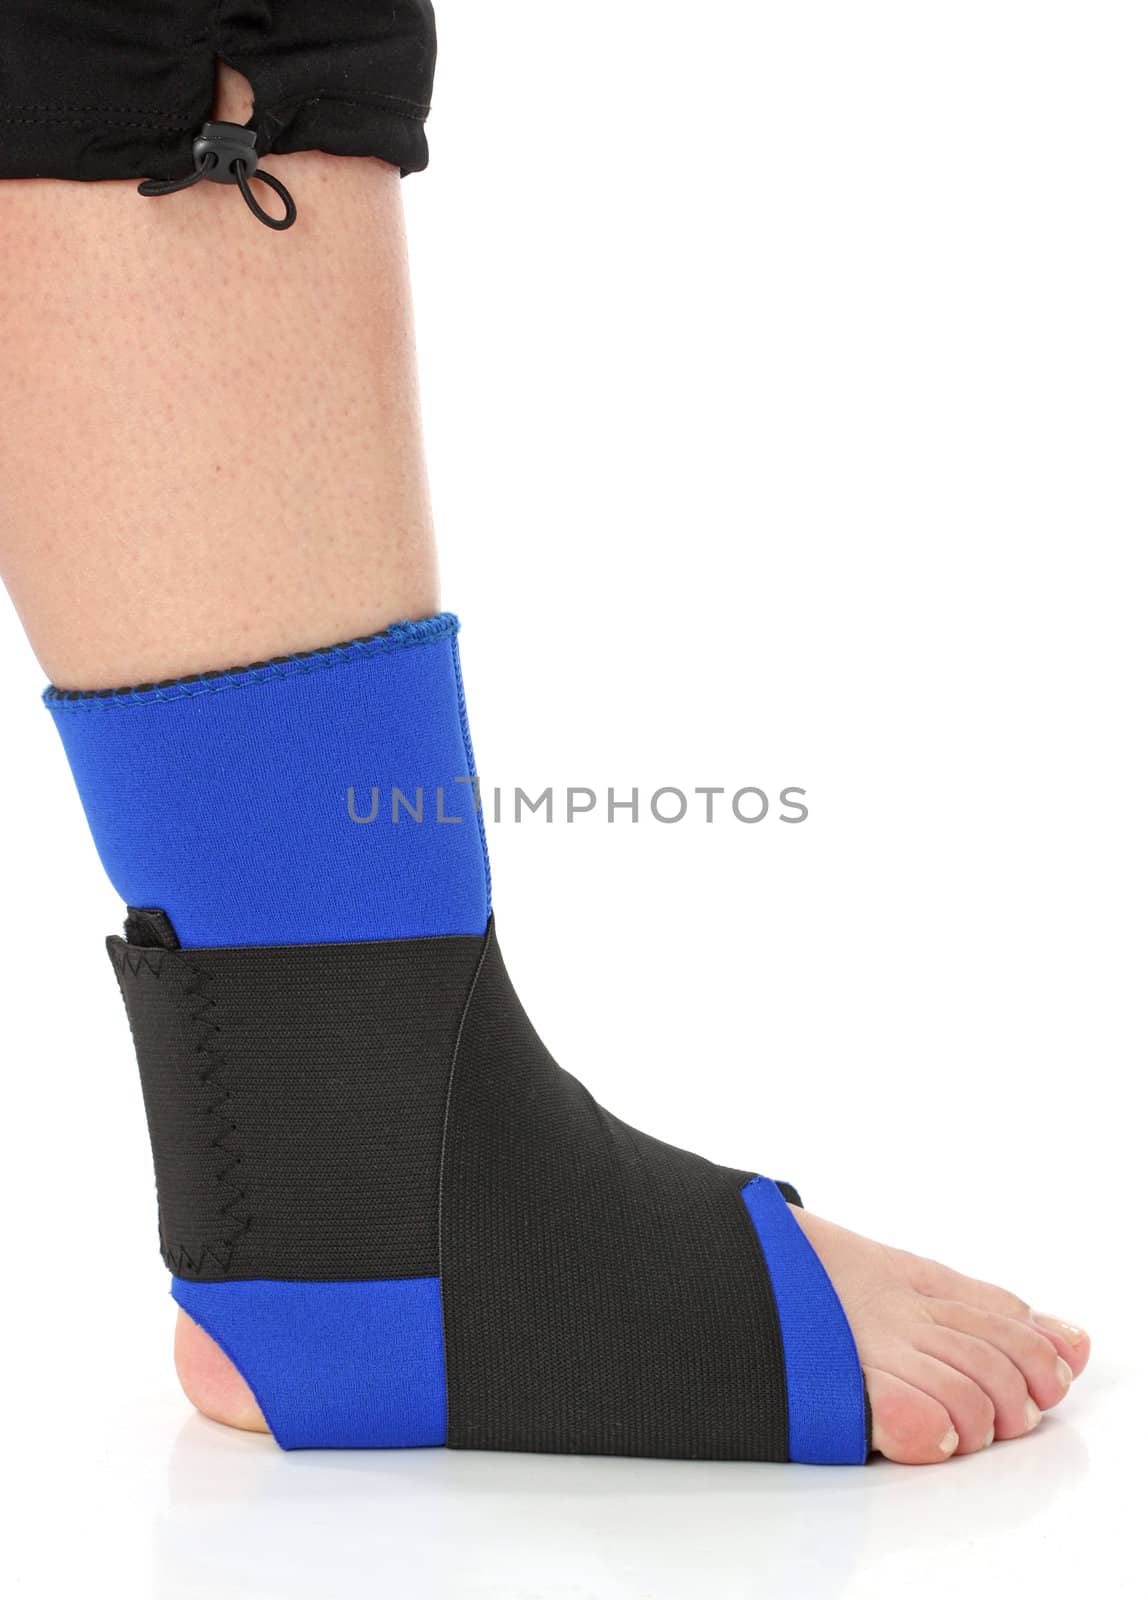 Foot with an ankle brace, over white